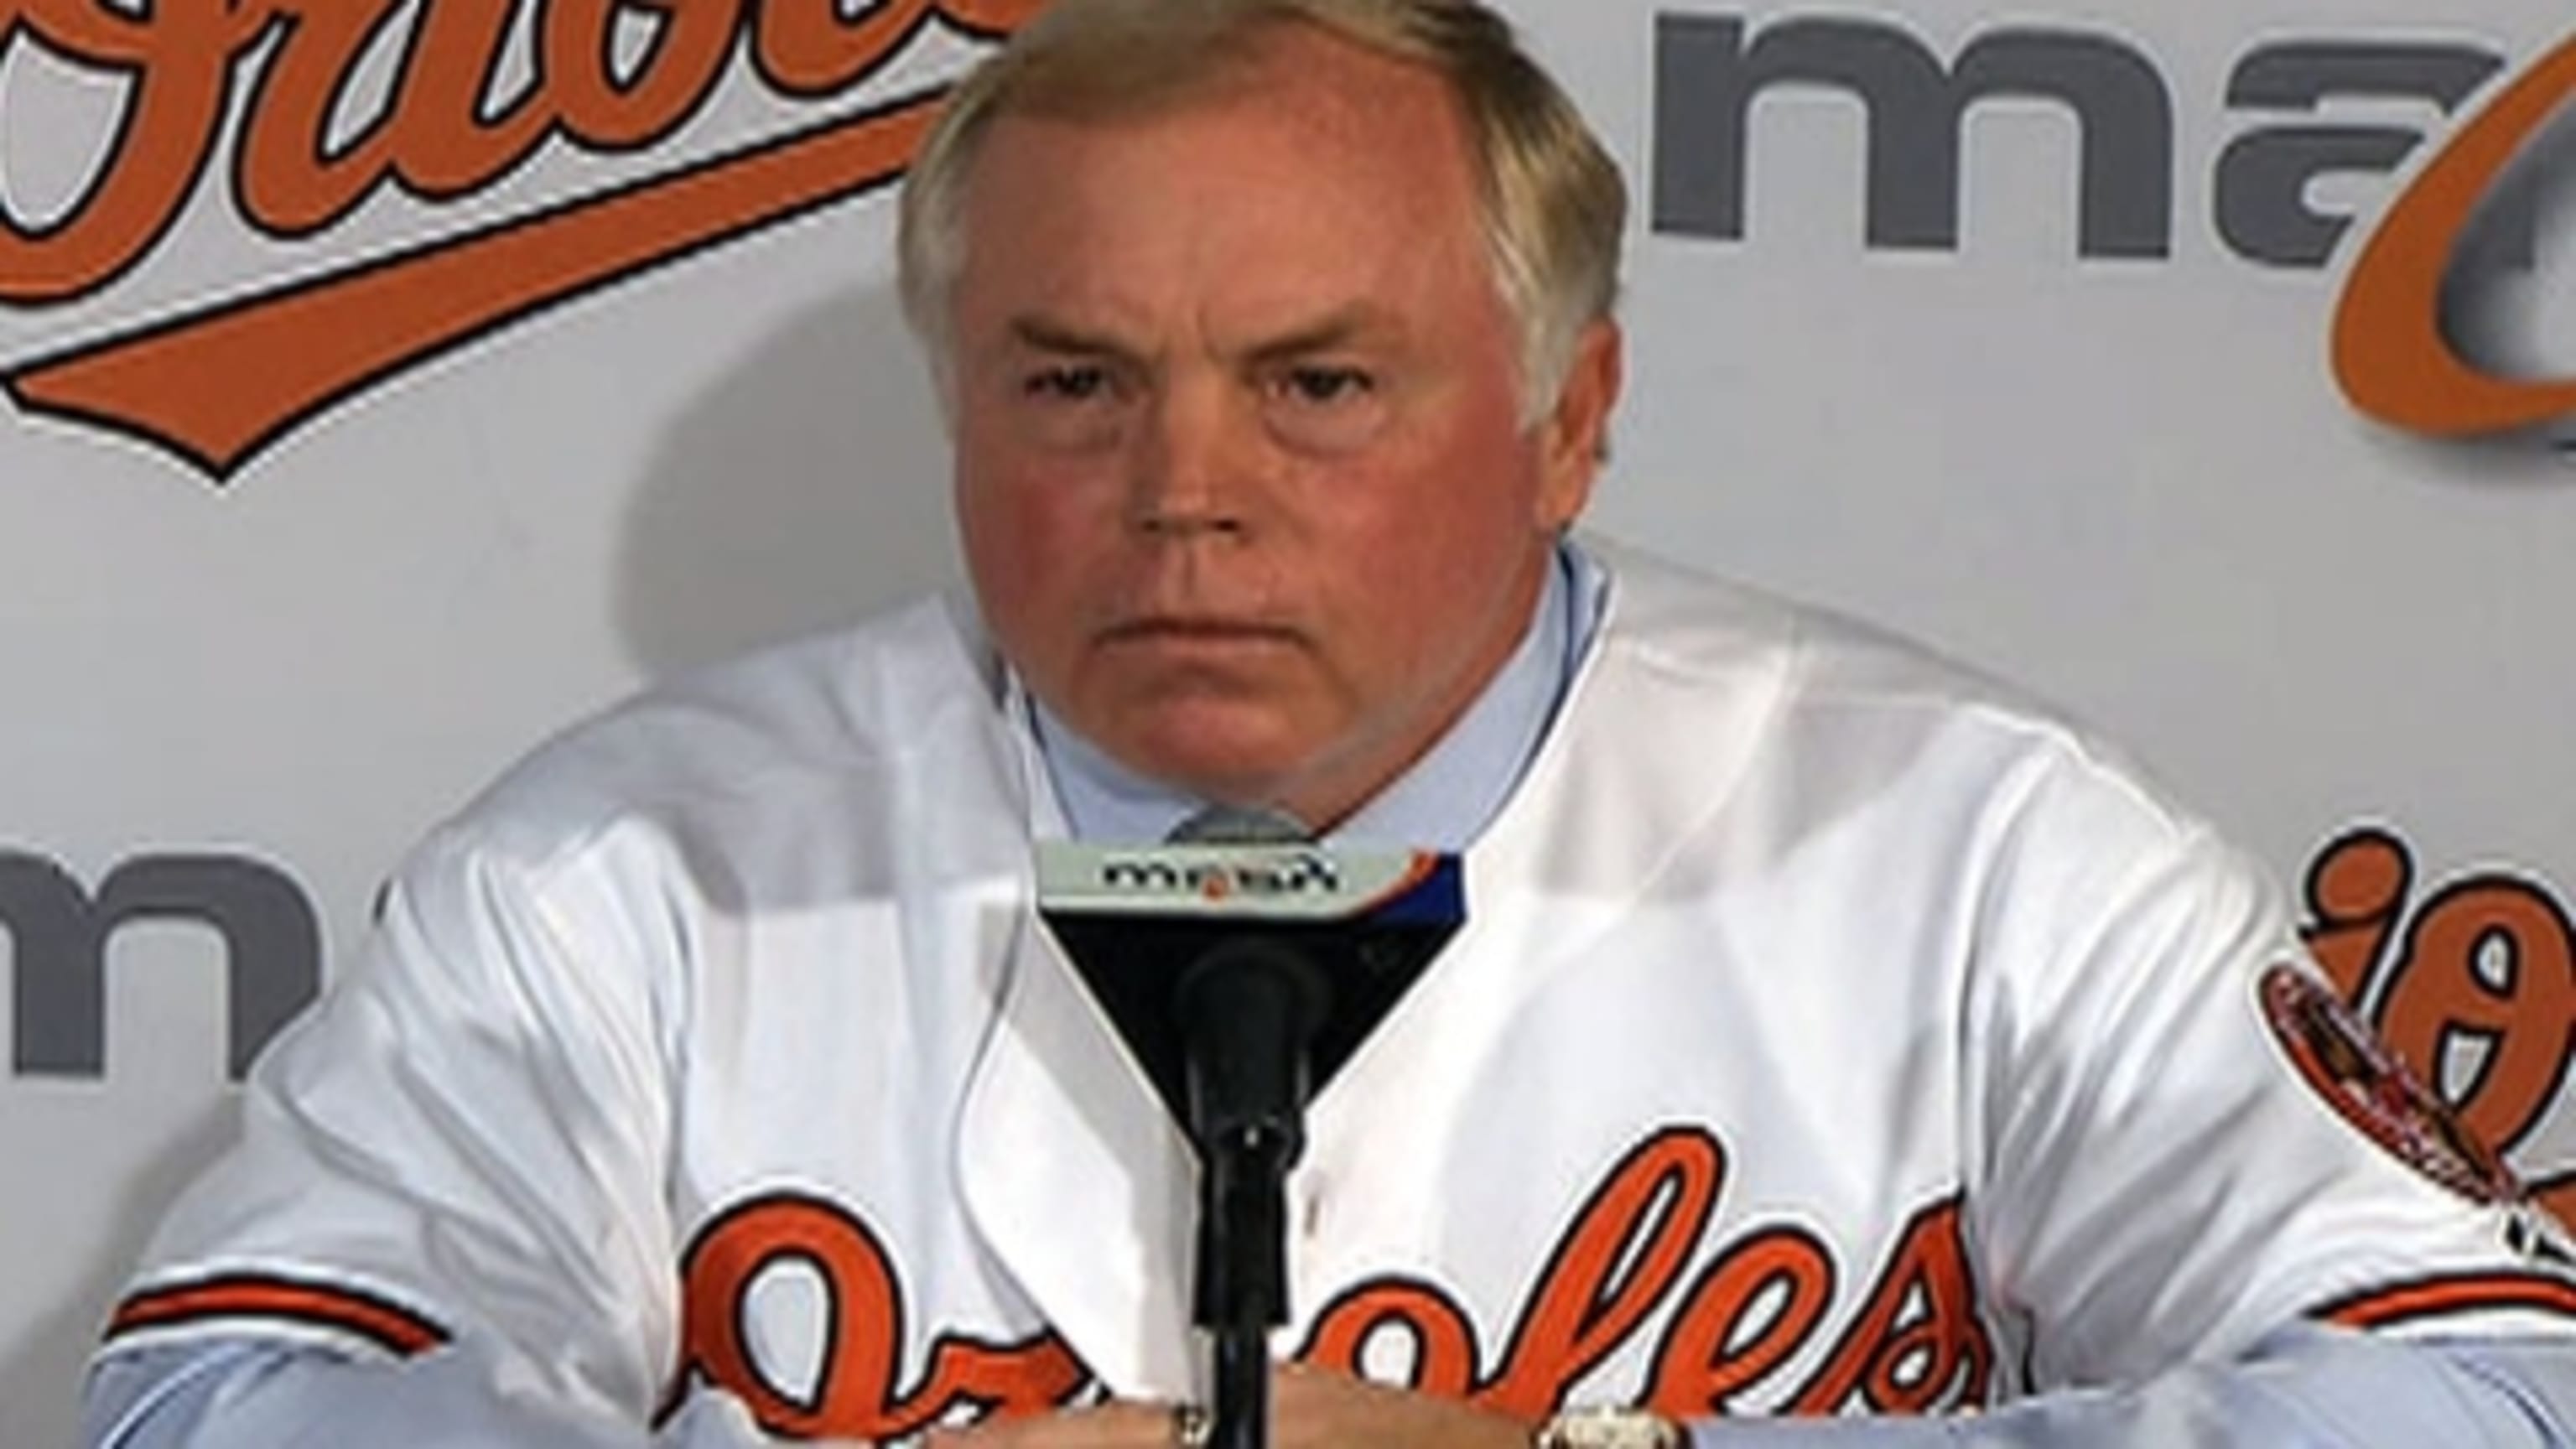 Mets players, coaches, and fans give Buck Showalter round of applause